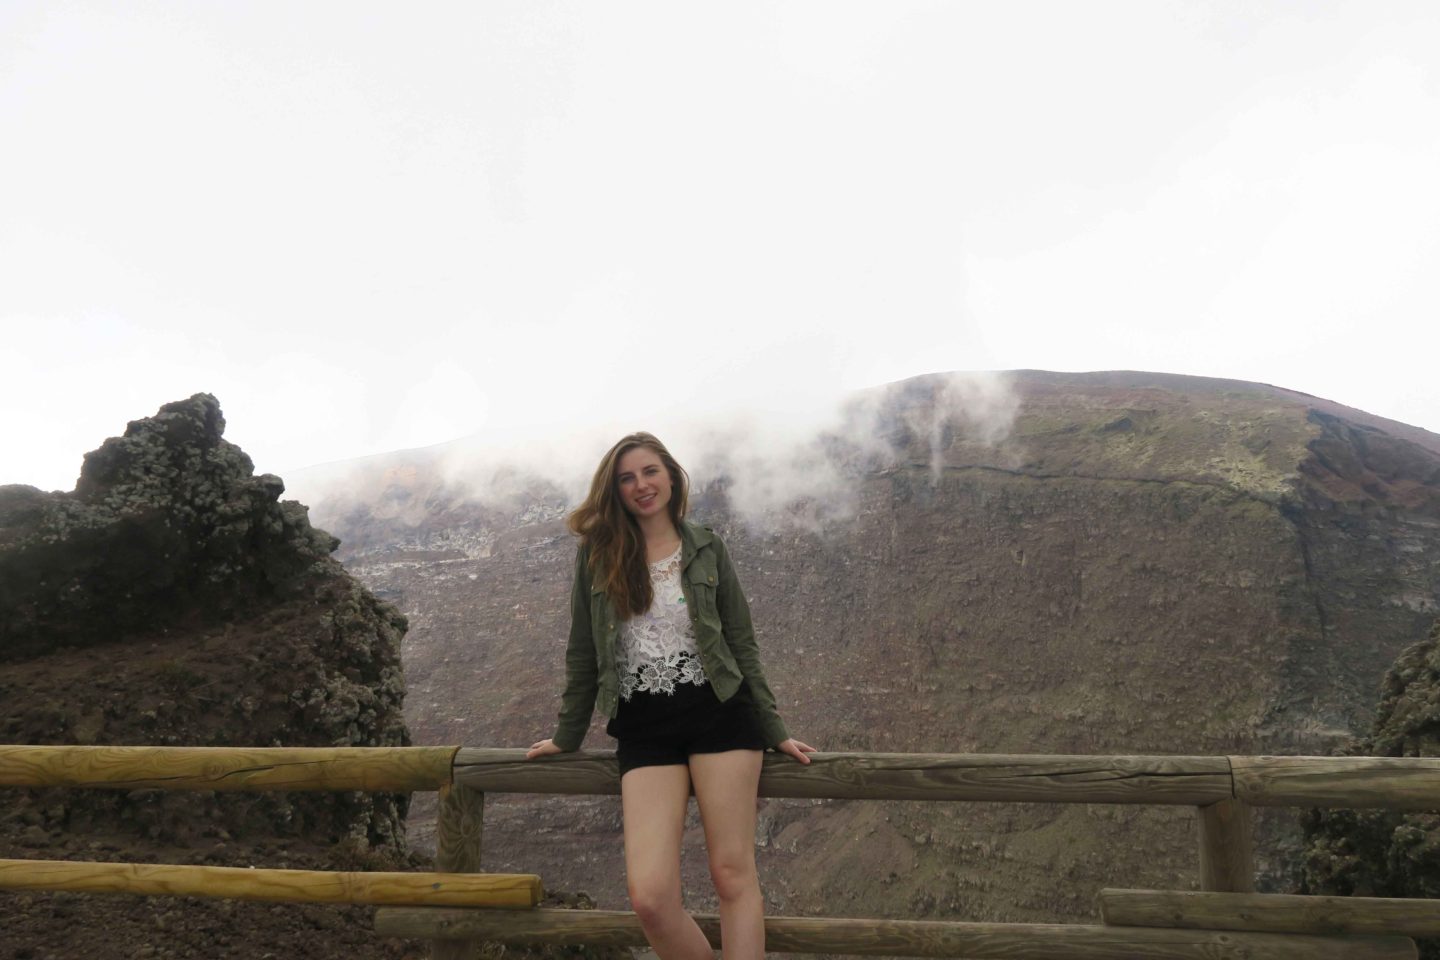 melissa carne on a day trip to mount vesuvius volcano in italy